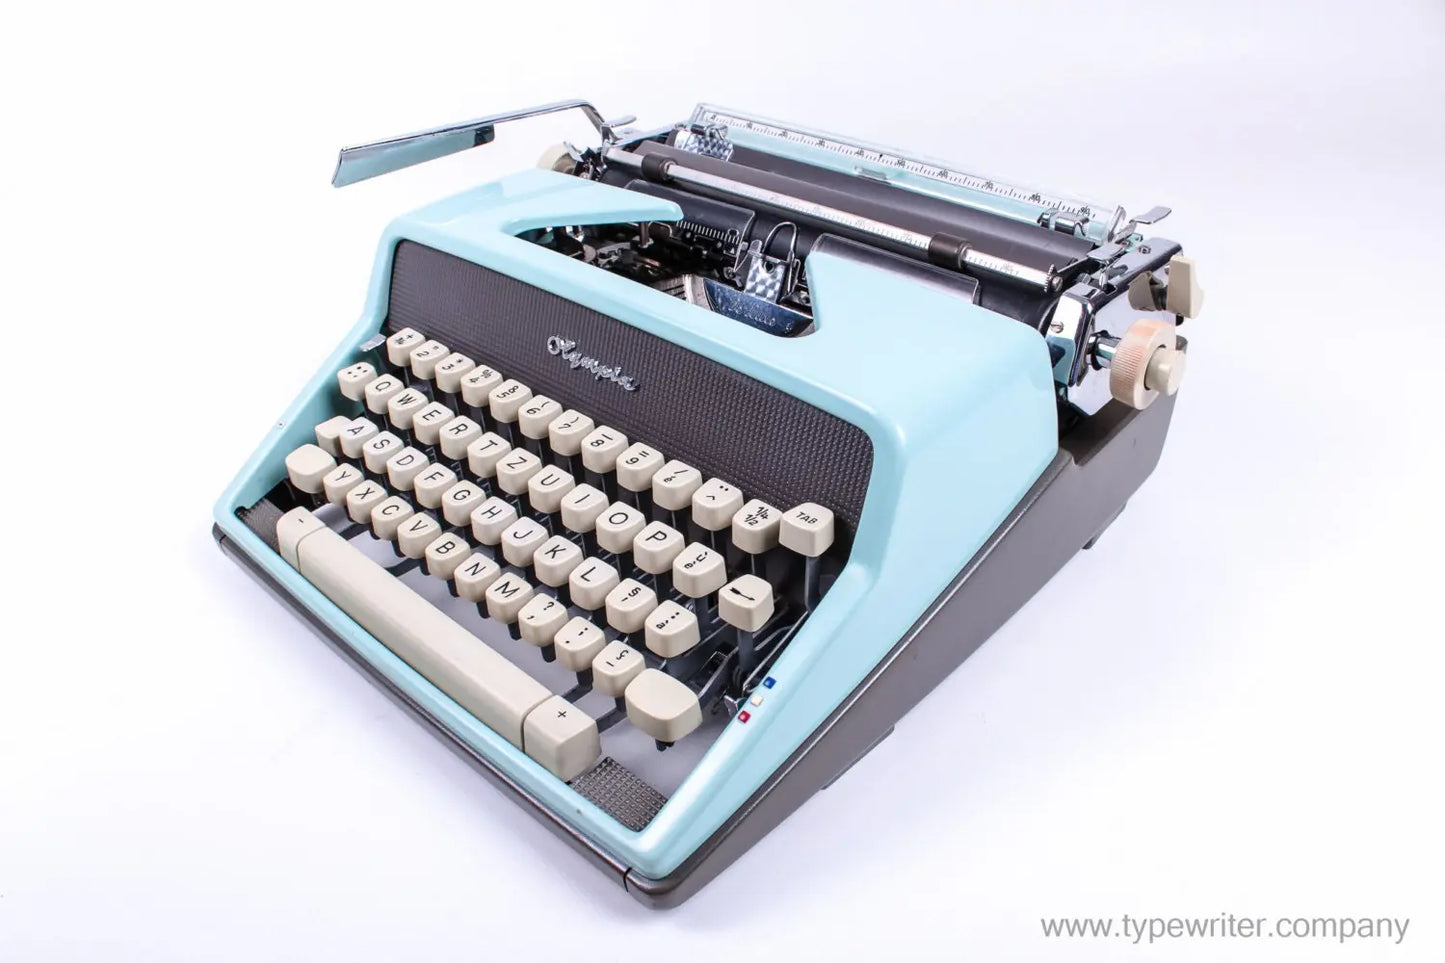 Olympia Monica SM7 Blue Typewriter, Vintage, Mint Condition, Manual Portable, Professionally Serviced by Typewriter.Company - ElGranero Typewriter.Company